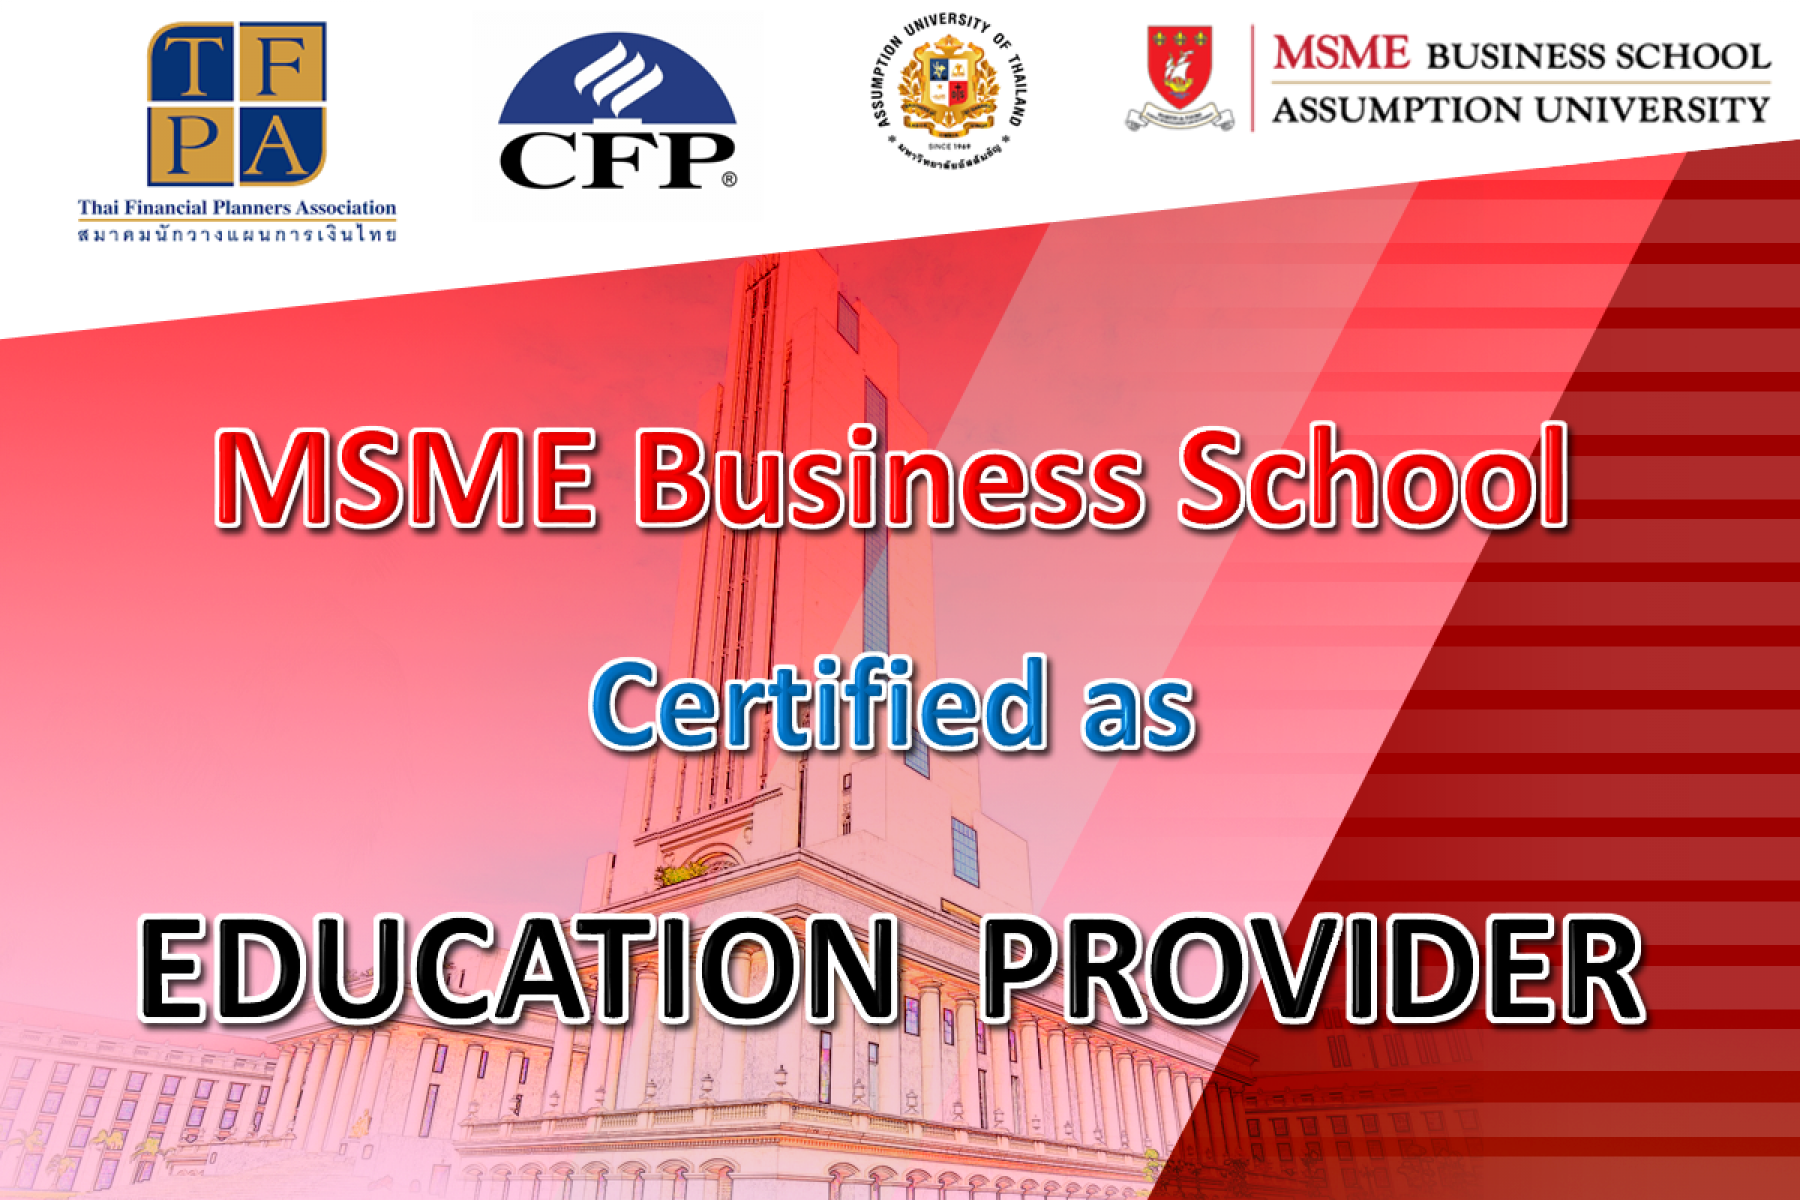 MSME Business School is Certified as an Education Provider